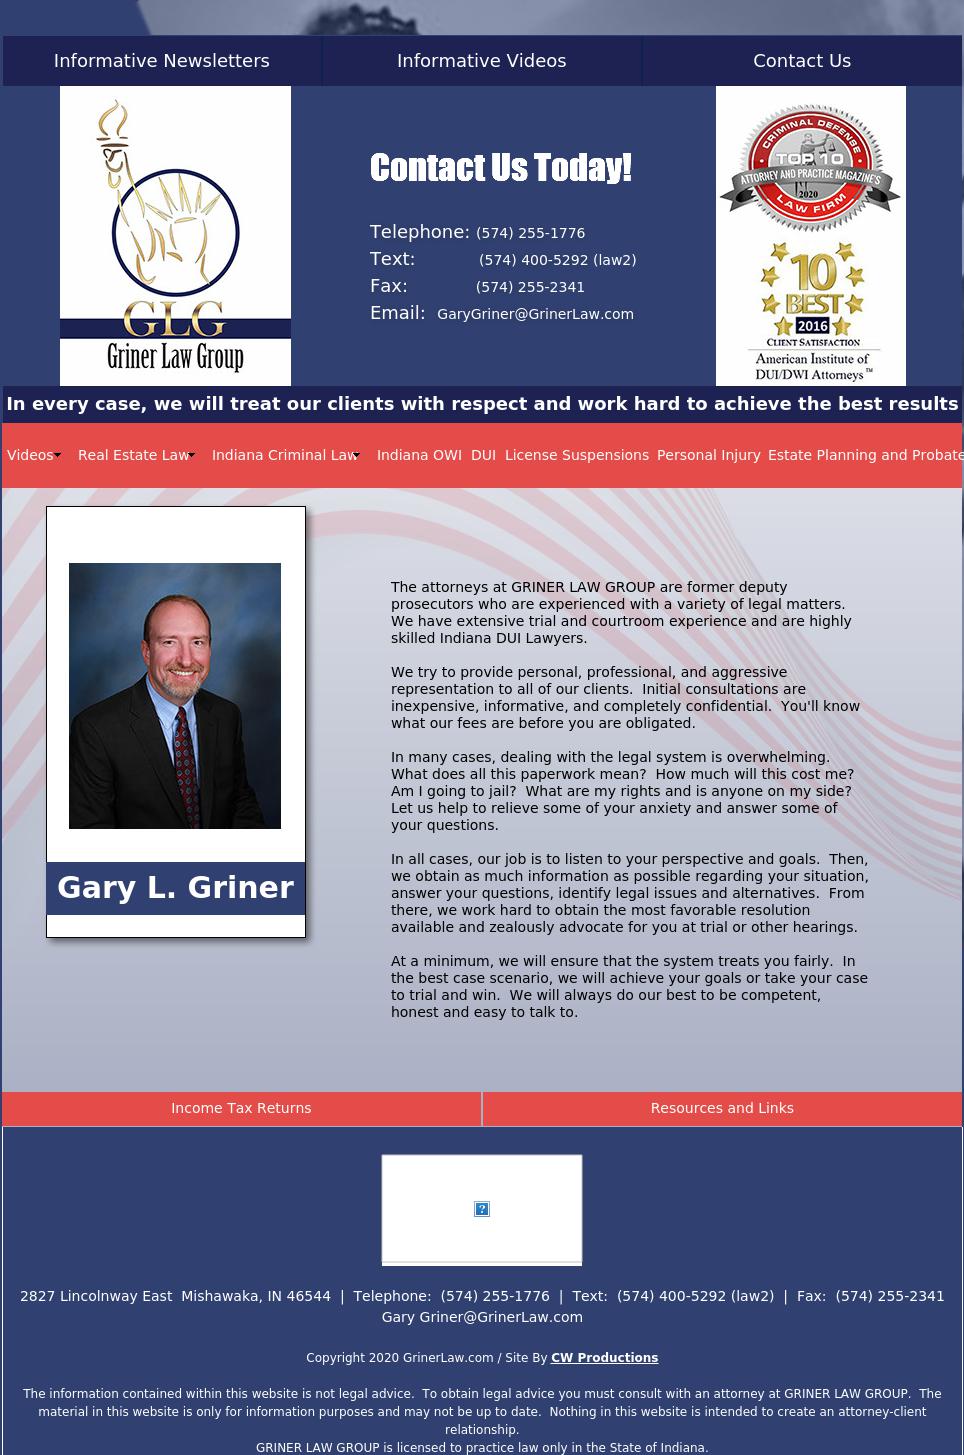 Griner & Company Attorneys at Law - Mishawaka IN Lawyers